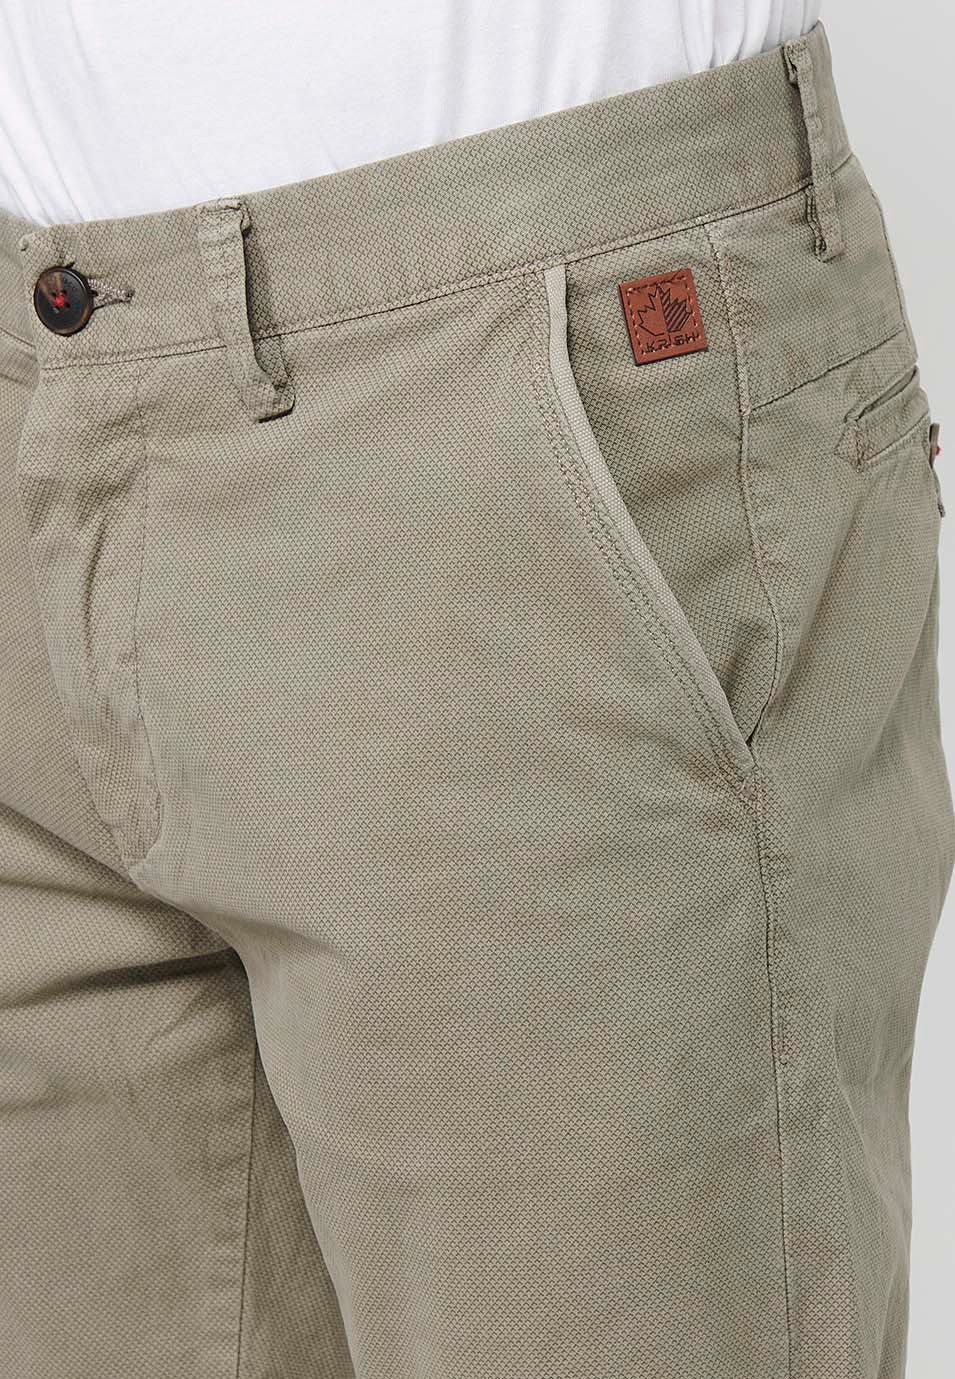 Men's Bermuda Chino Shorts with Turn-Up Finish with Front Zipper and Button Closure with Four Pockets in Mink Color 6